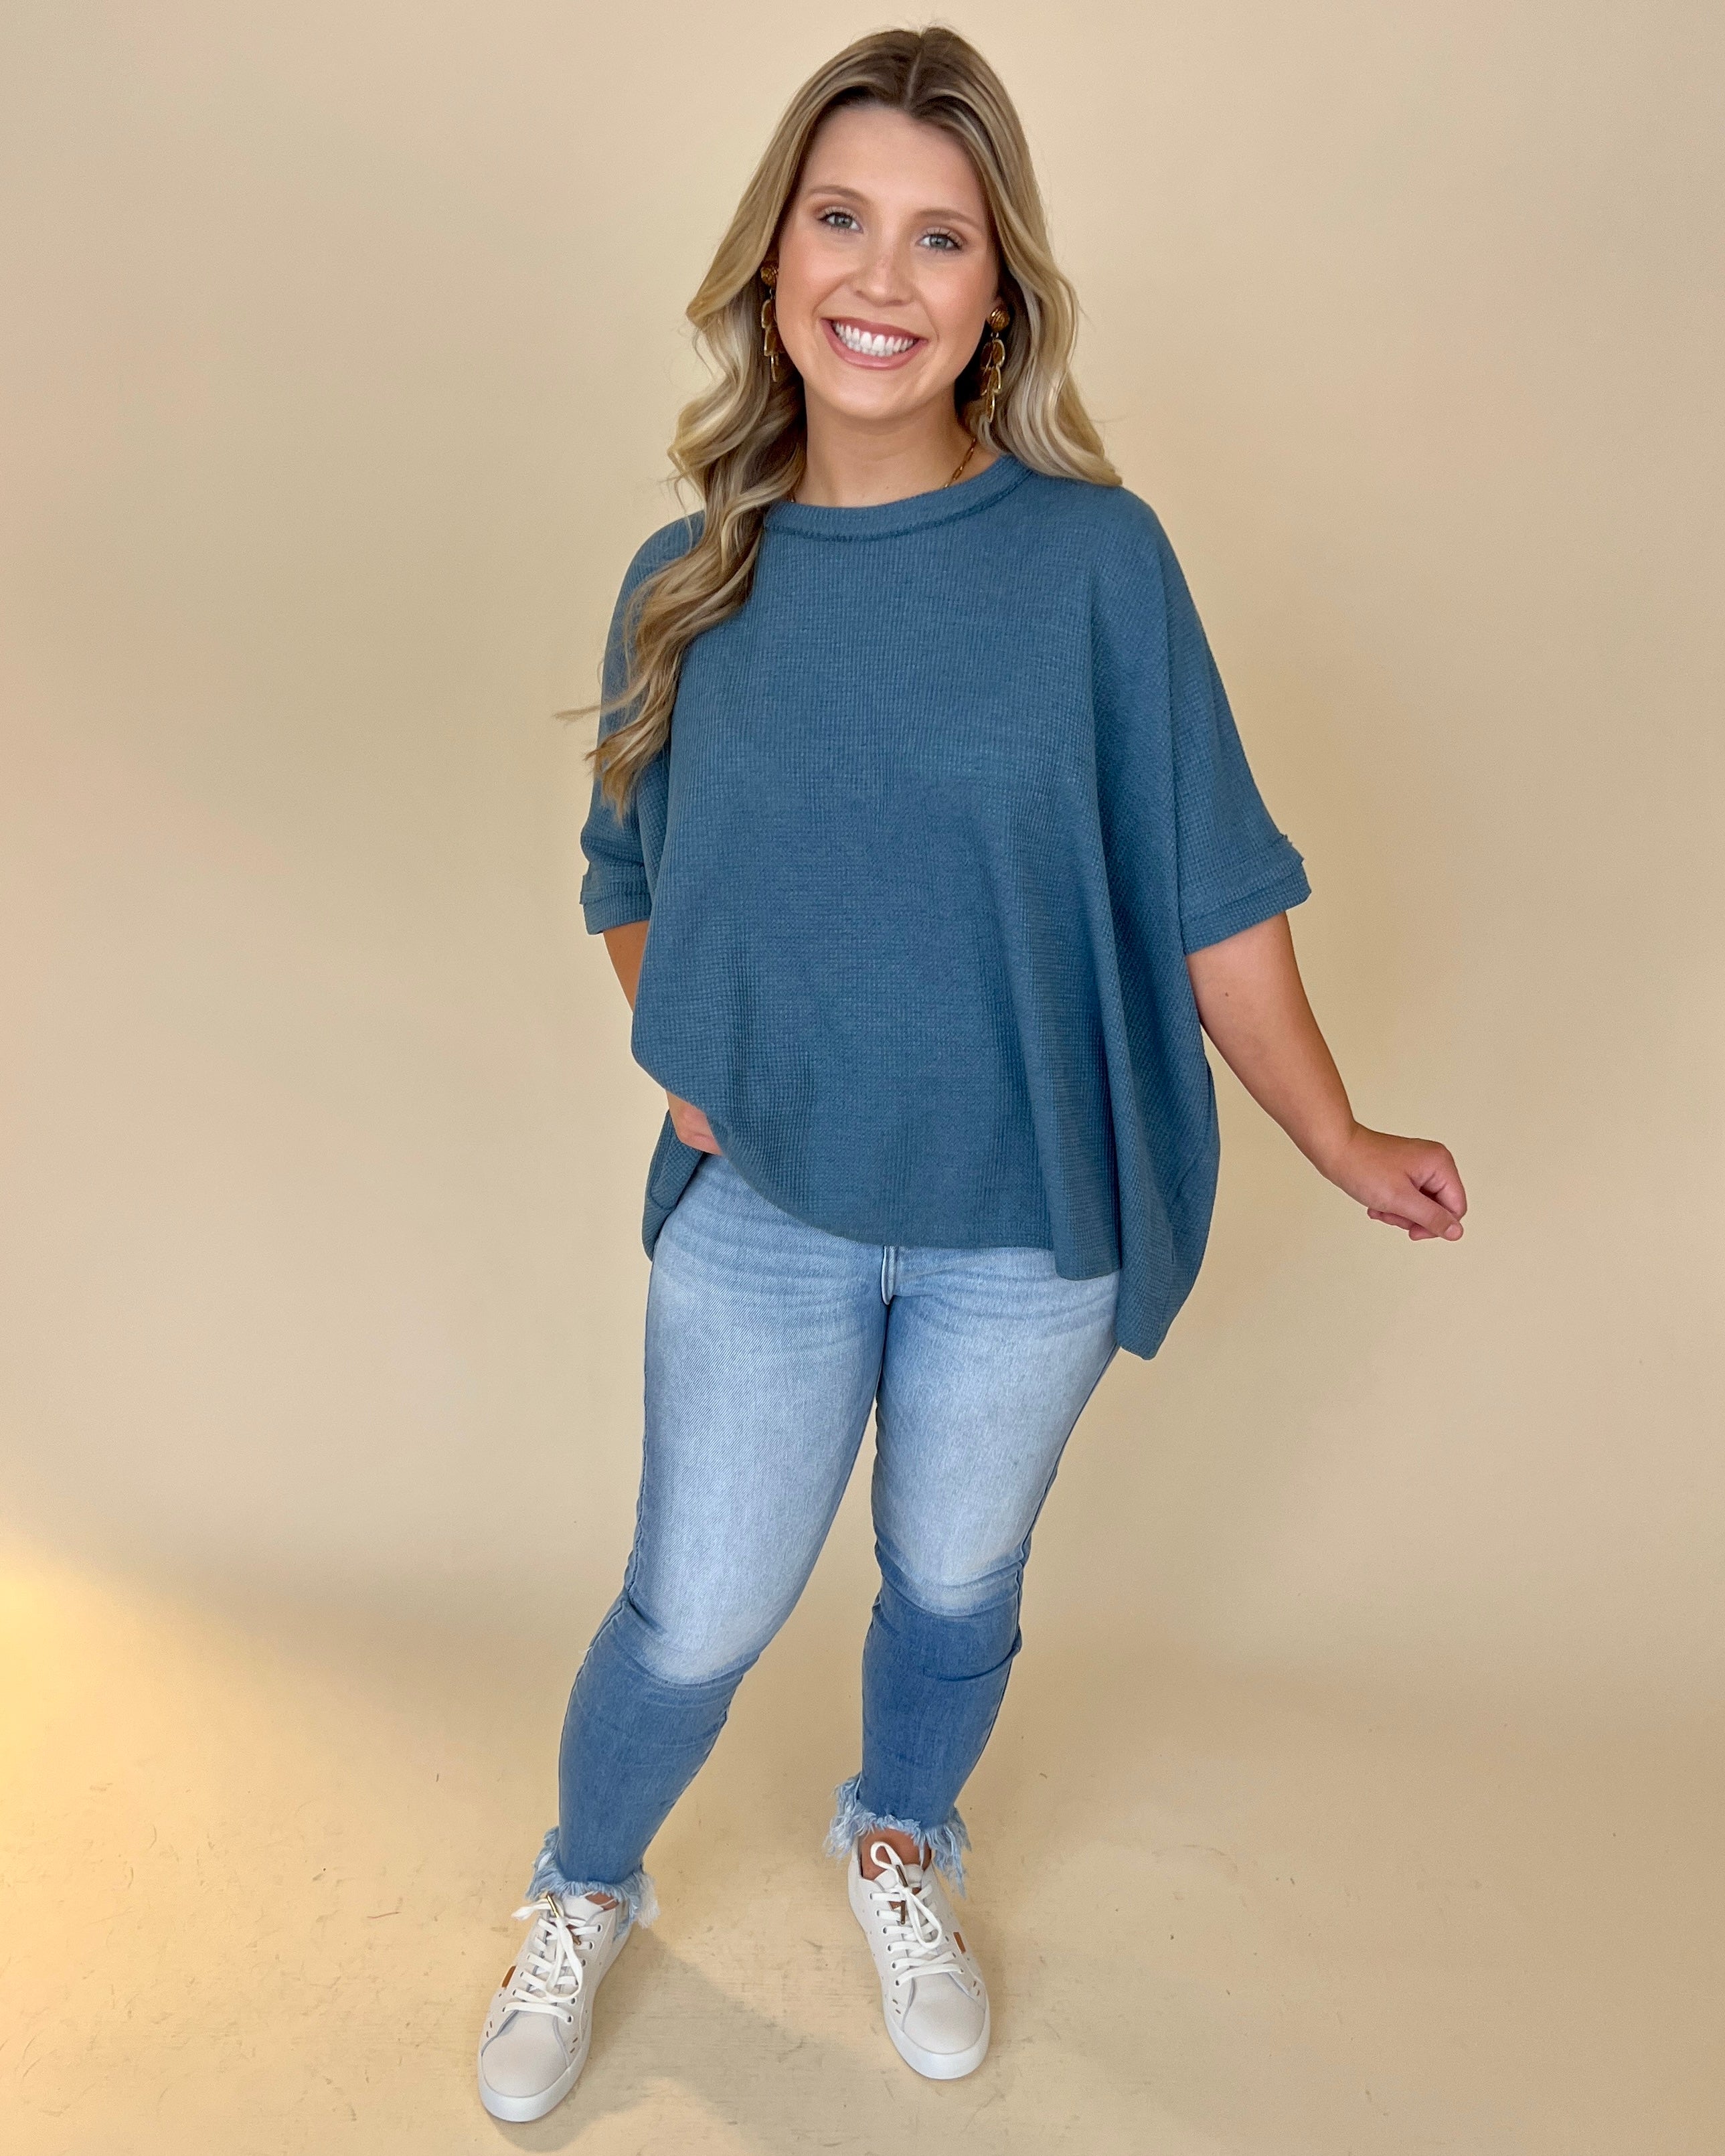 Find Myself Dusty Blue Waffle Texture Round Neck Top-Shop-Womens-Boutique-Clothing